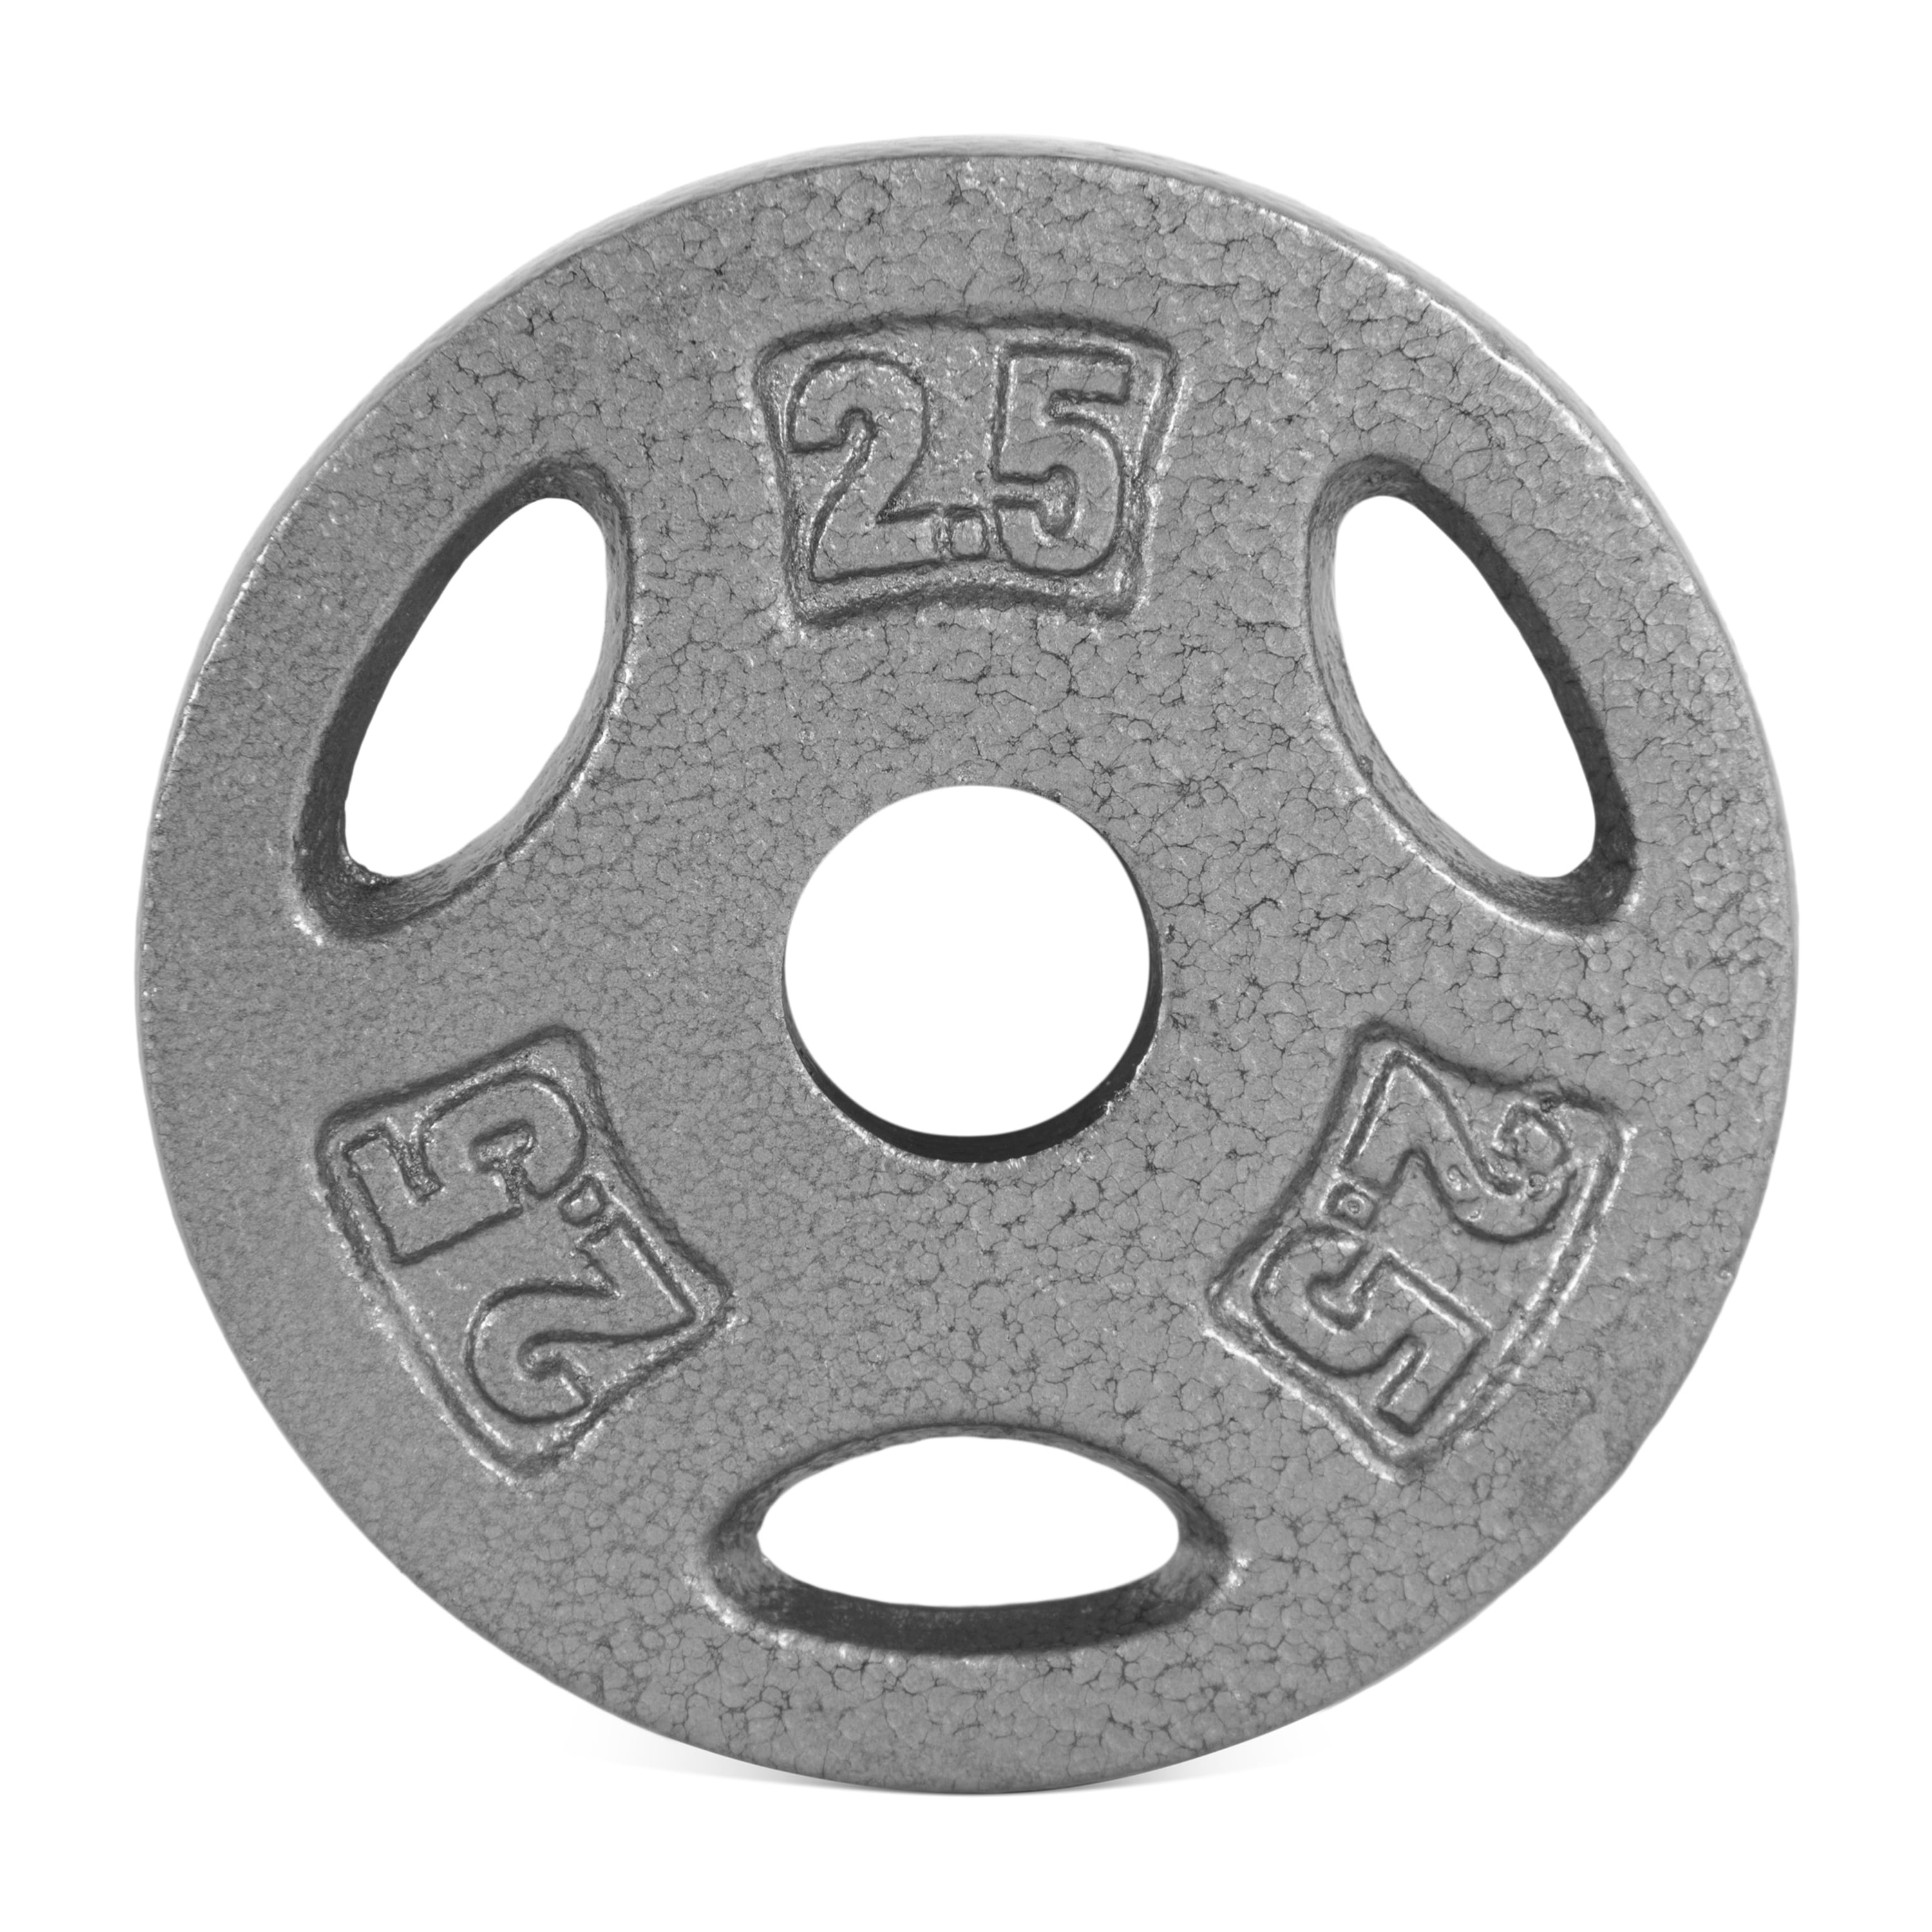 set of 4-2.5 LB Pound CAP Weight Cast Iron Plates standard 1 inch 10lb total